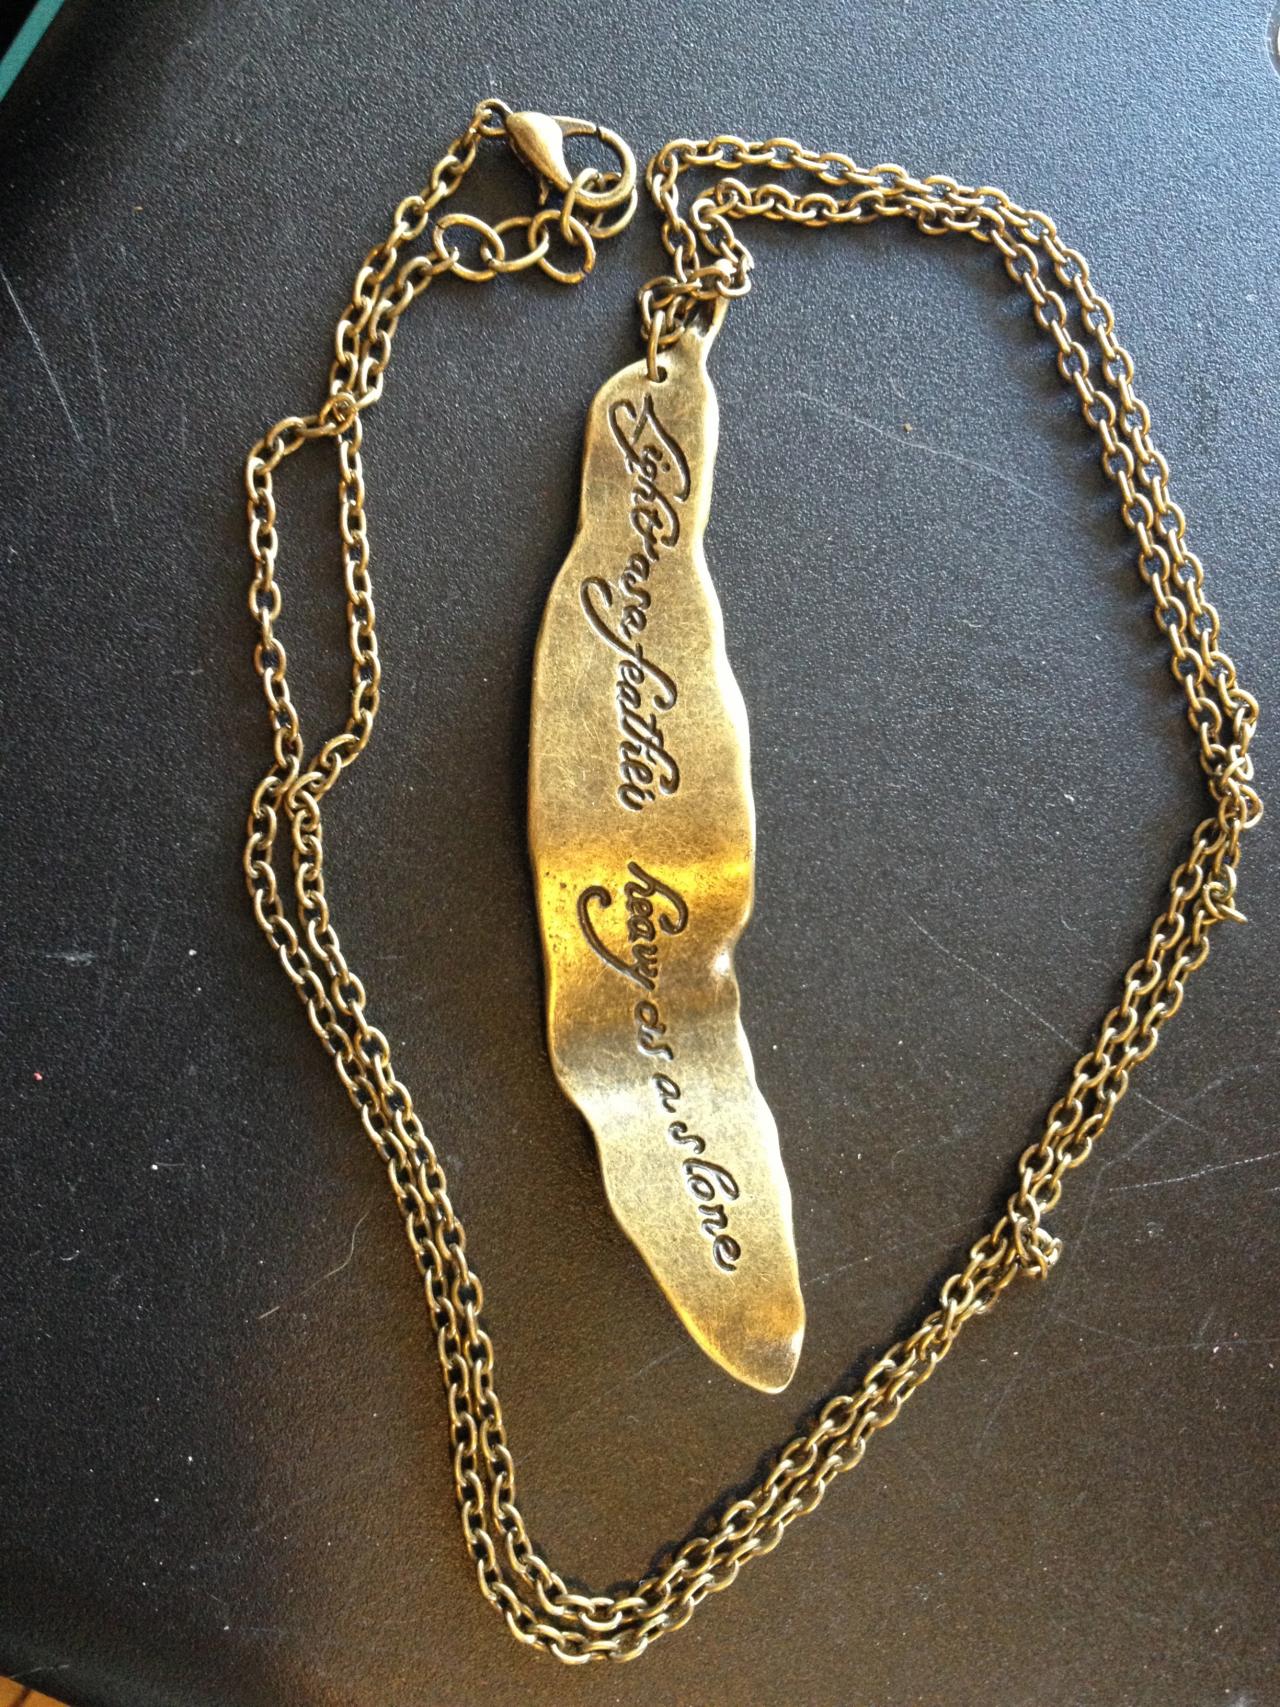 Light As A Feather Bronze Metal Necklace